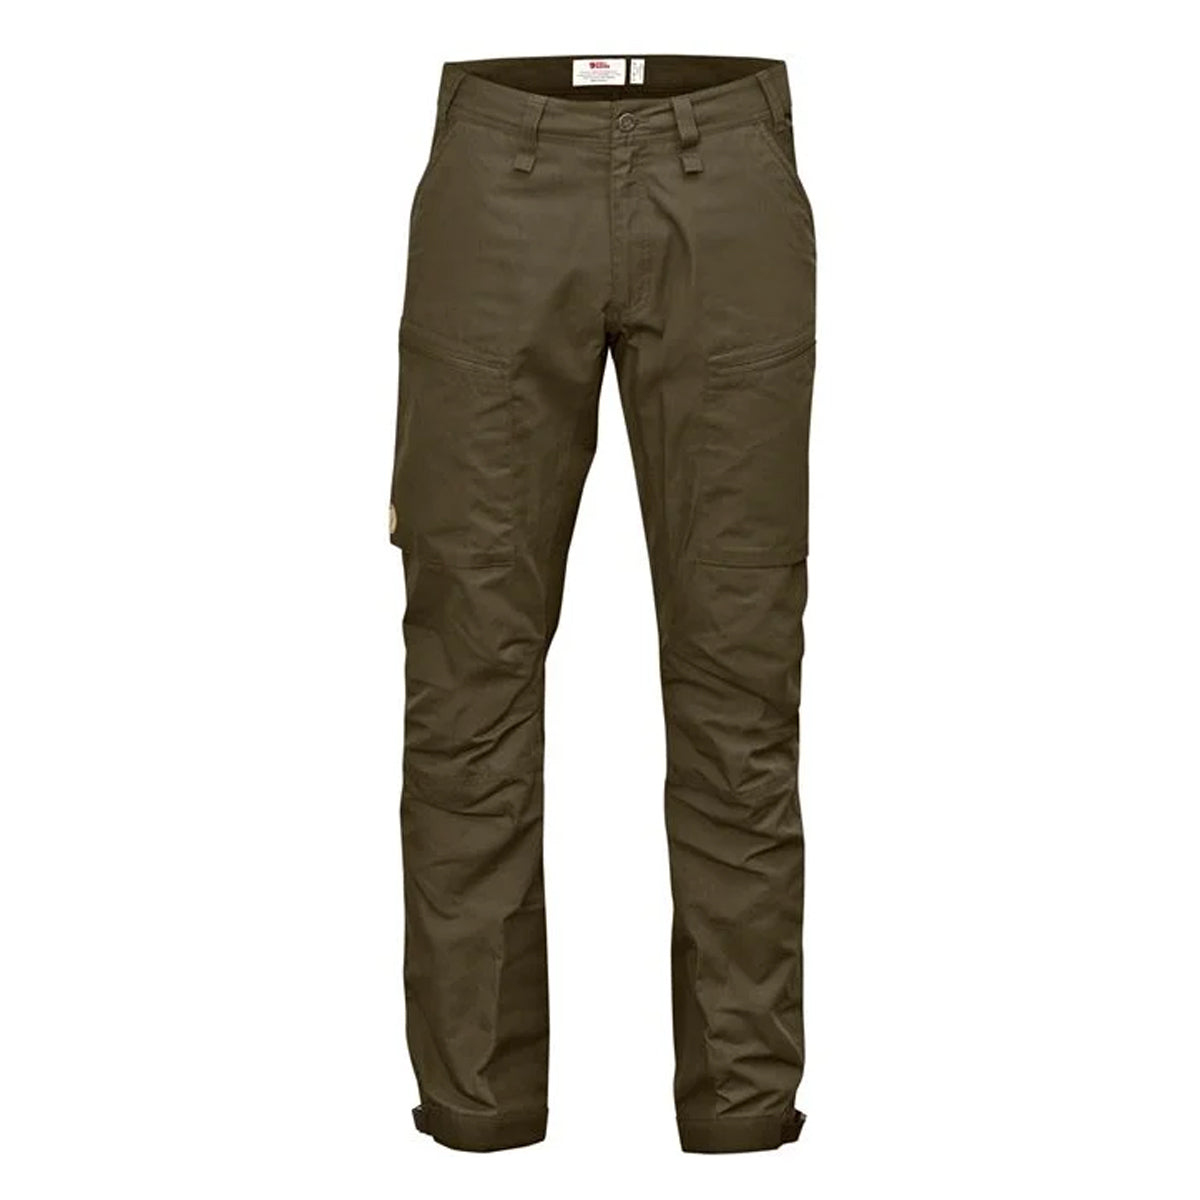 UNIVERSAL PANEL PANT IN PISTACHIO – Brooks Marks